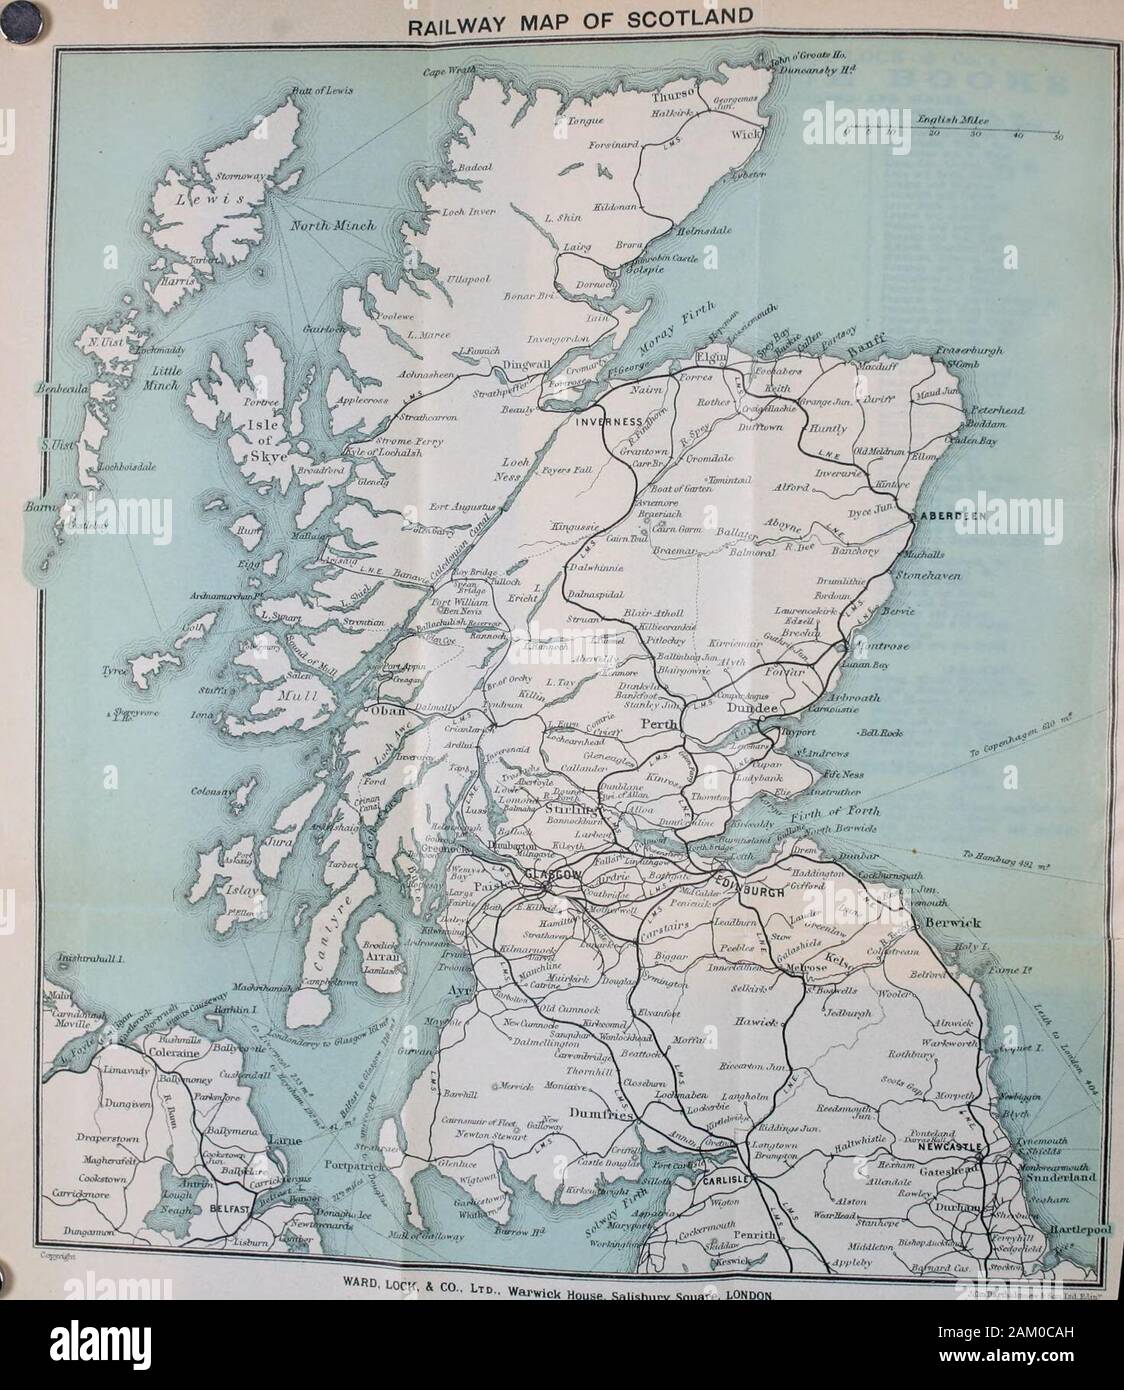 A pictorial and descriptive guide to Aberdeen, Deeside, Donside, Strathspey, Cruden Bay, Huntly, Banff, Elgin, etc . nd South Cornwall Warwick, Konilworth, to. Harrogate and District Wells, Glastonbury, &c Hastings, St. Leonards, to. Weston-super-Mare Hereford and Wye Valley Weymouth and District Heme Bay, Whitstnble, to Whitby and District Hvthe, Littlestone, to. Worcester and District Iliracombe and N. Devon Worthing and S.W. Sussex Isle o! Man Wye Valley Isle ol Wight Yarmouth and the Broads Lake District The SCOTLAND. IRELAND. Aberdeen, Deeside, to. Antrim, Giants Causeway, to. Edinburgh a Stock Photo